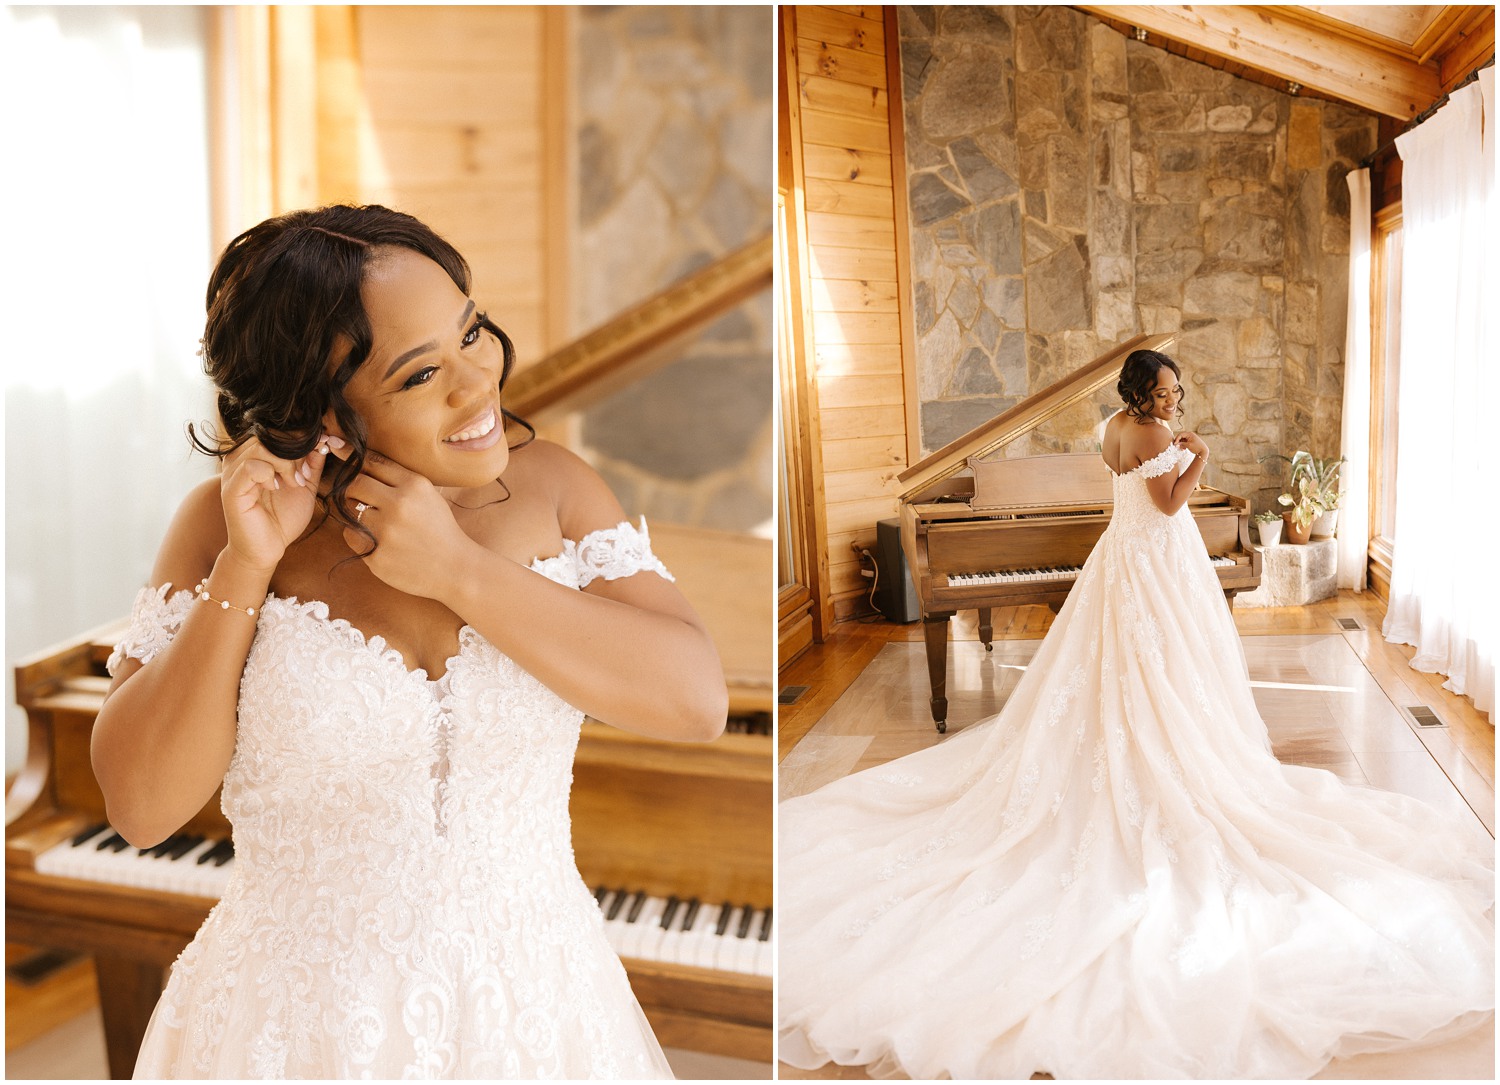 Bride puts finishing touches on her wedding look take by Winston Salem photographer Chelsea Renay